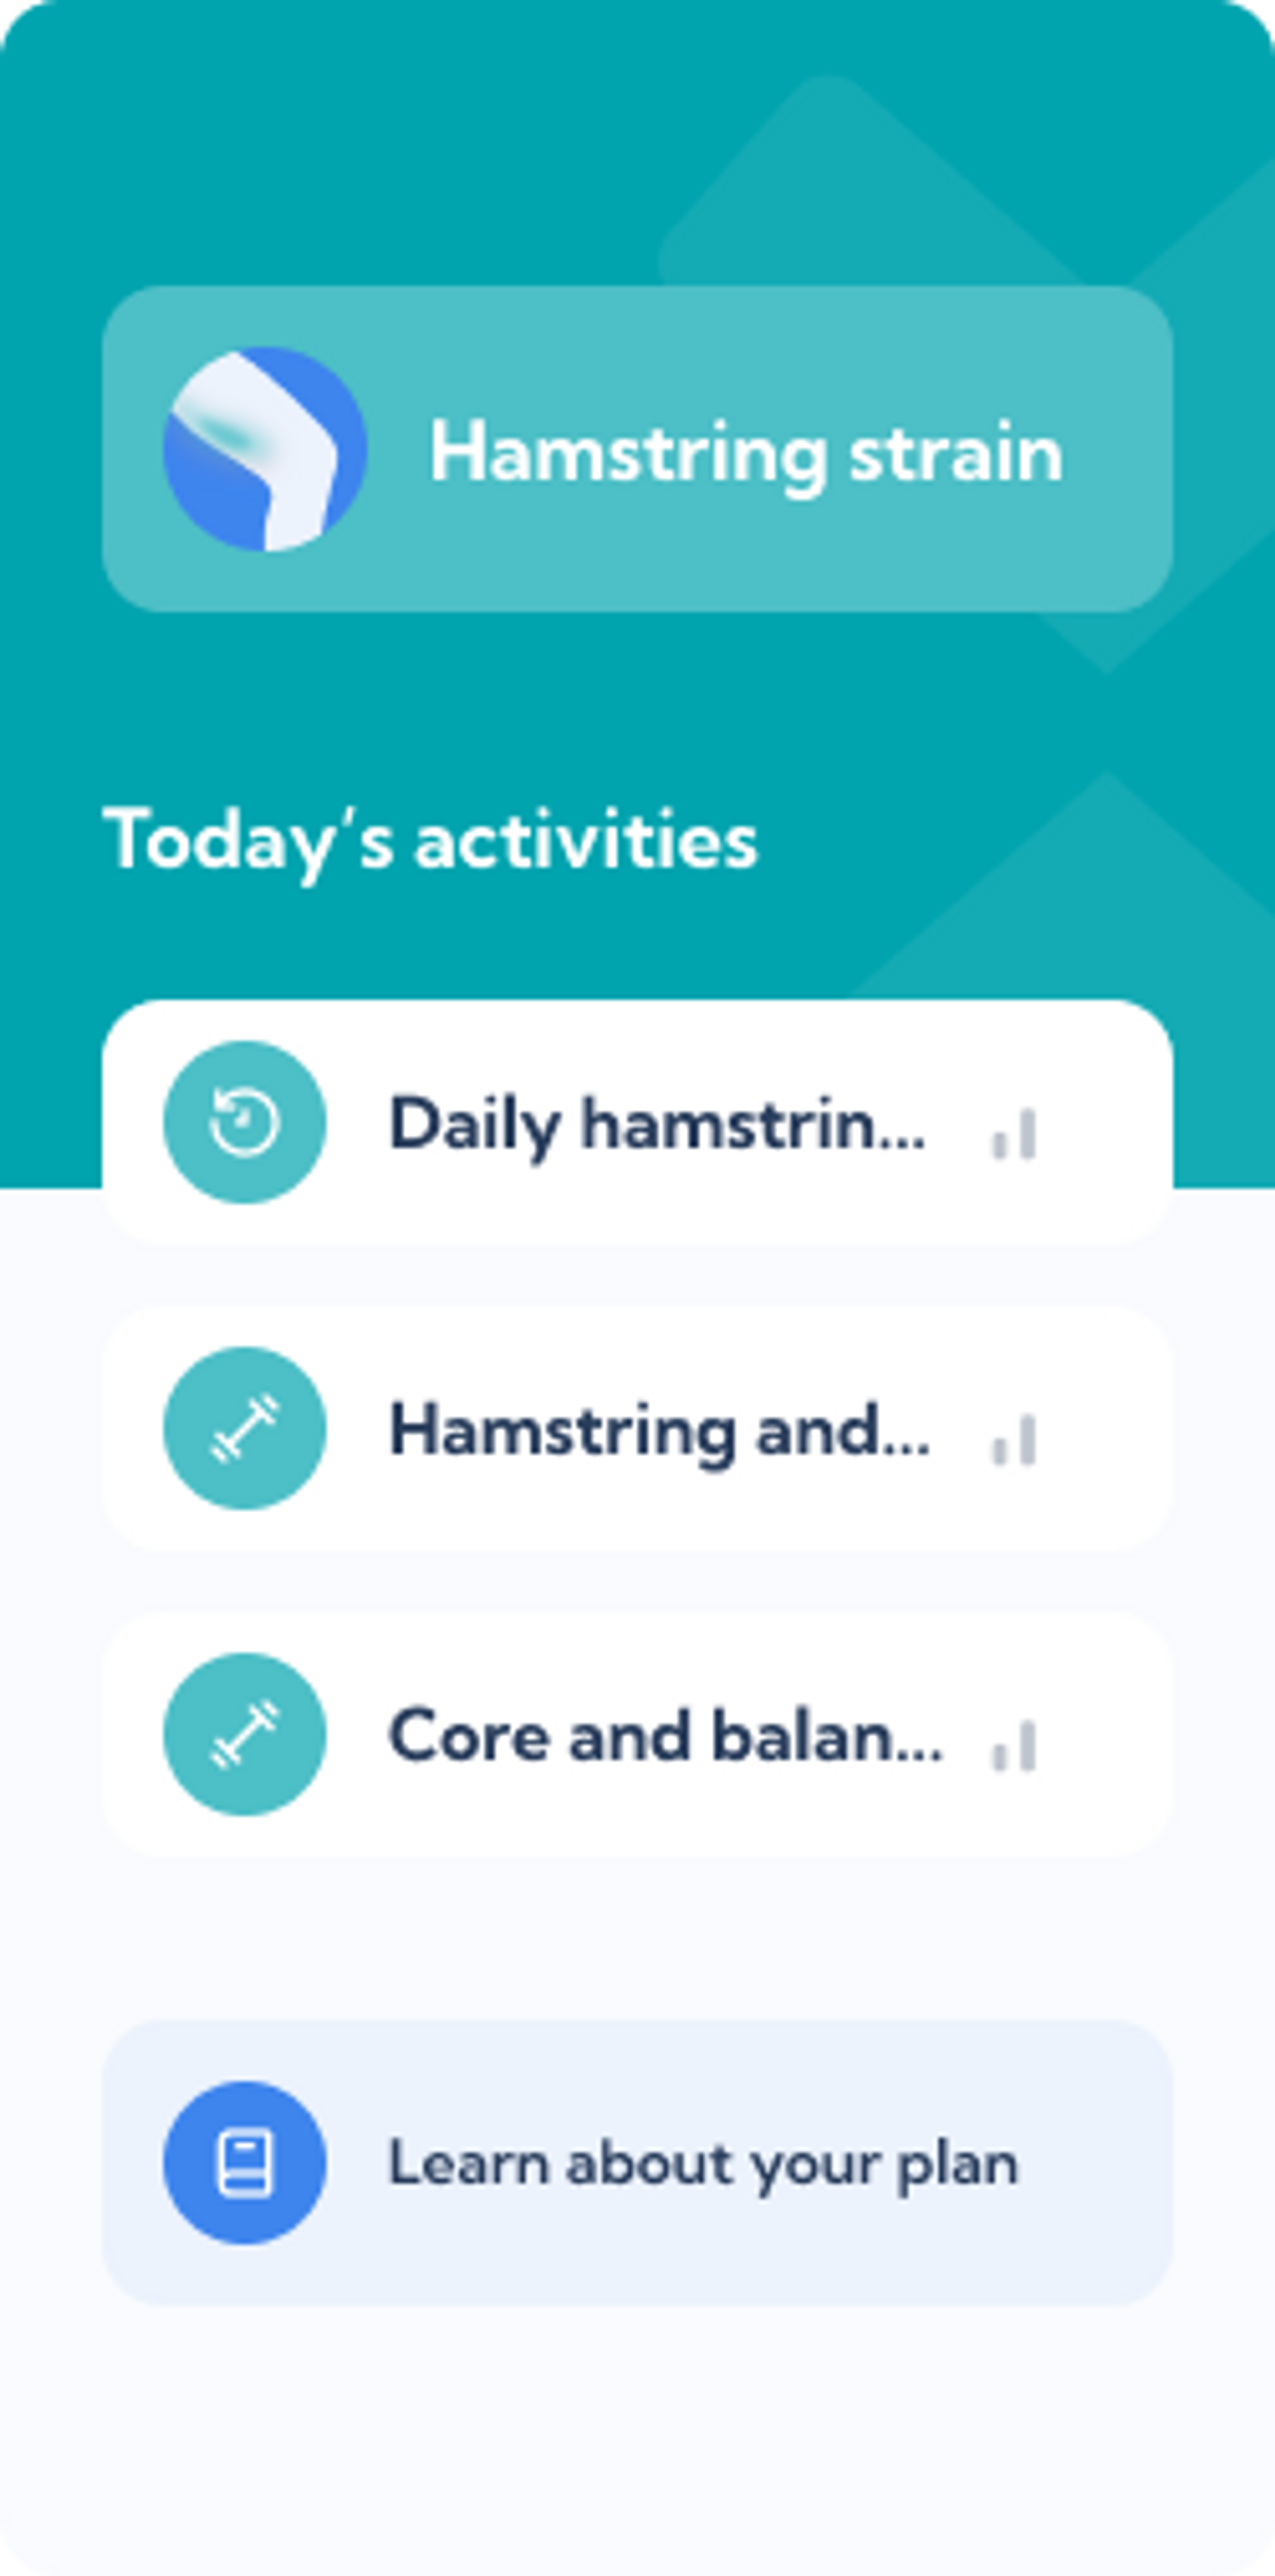 Hamstring strain treatment plan – Dashboard overview of the Exakt Health app